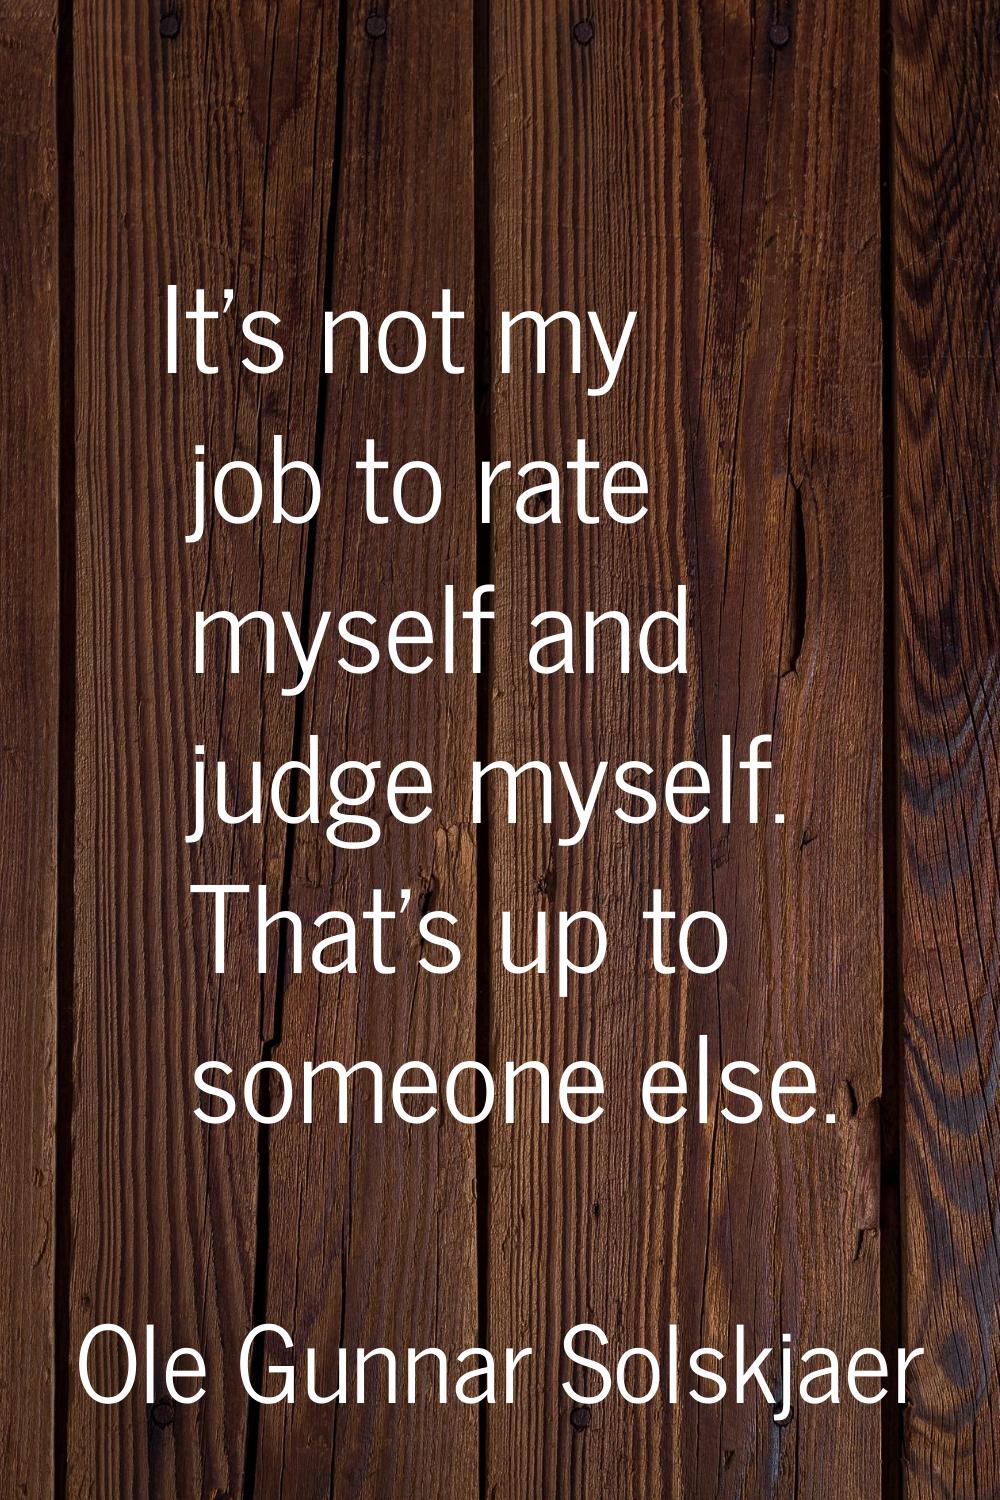 It's not my job to rate myself and judge myself. That's up to someone else.